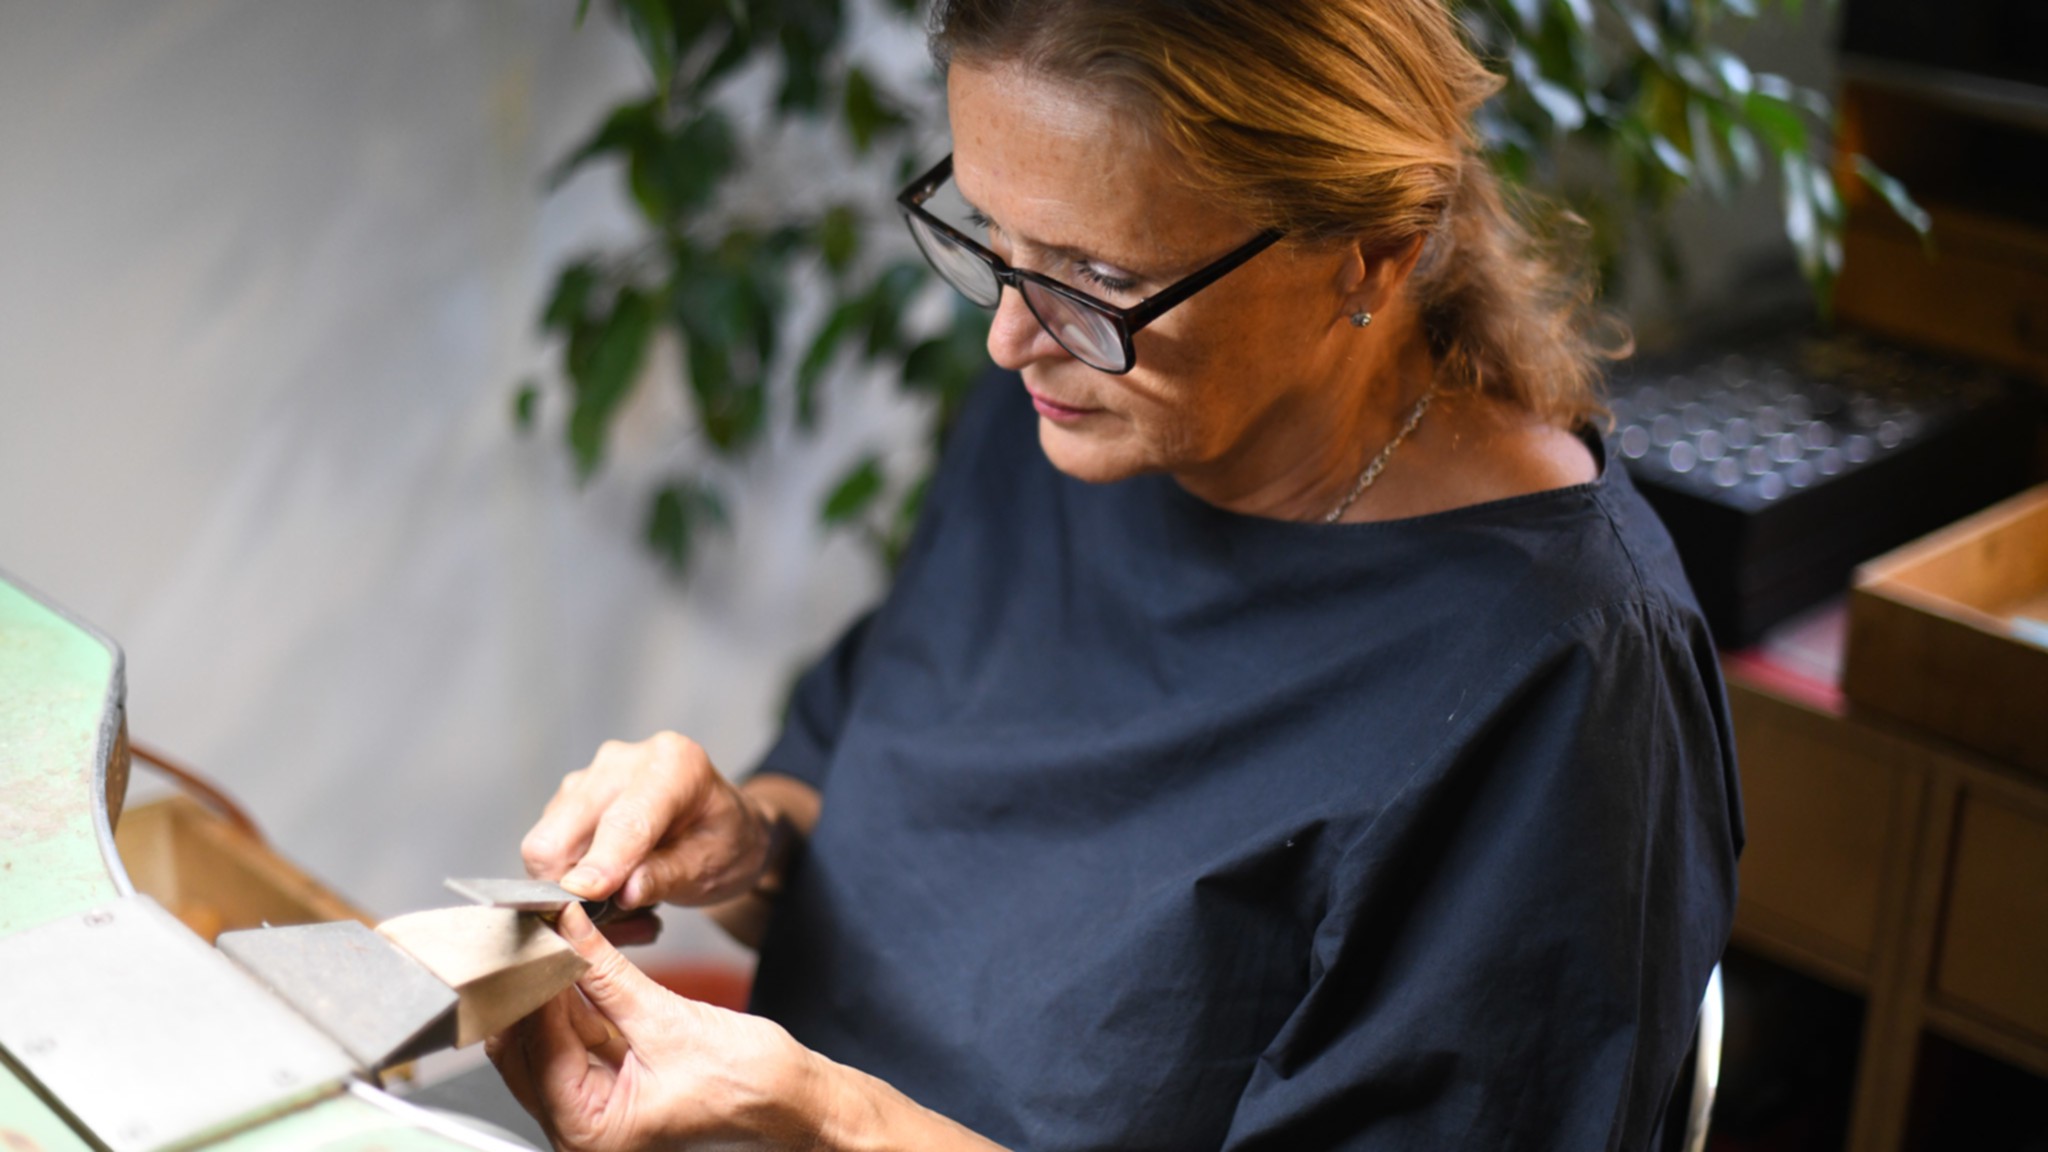 Video preview of jewellery designer Barbara Bertagnolli working in her London studio. The video shows the jewels, materials and inspiration for her one-off pieces.